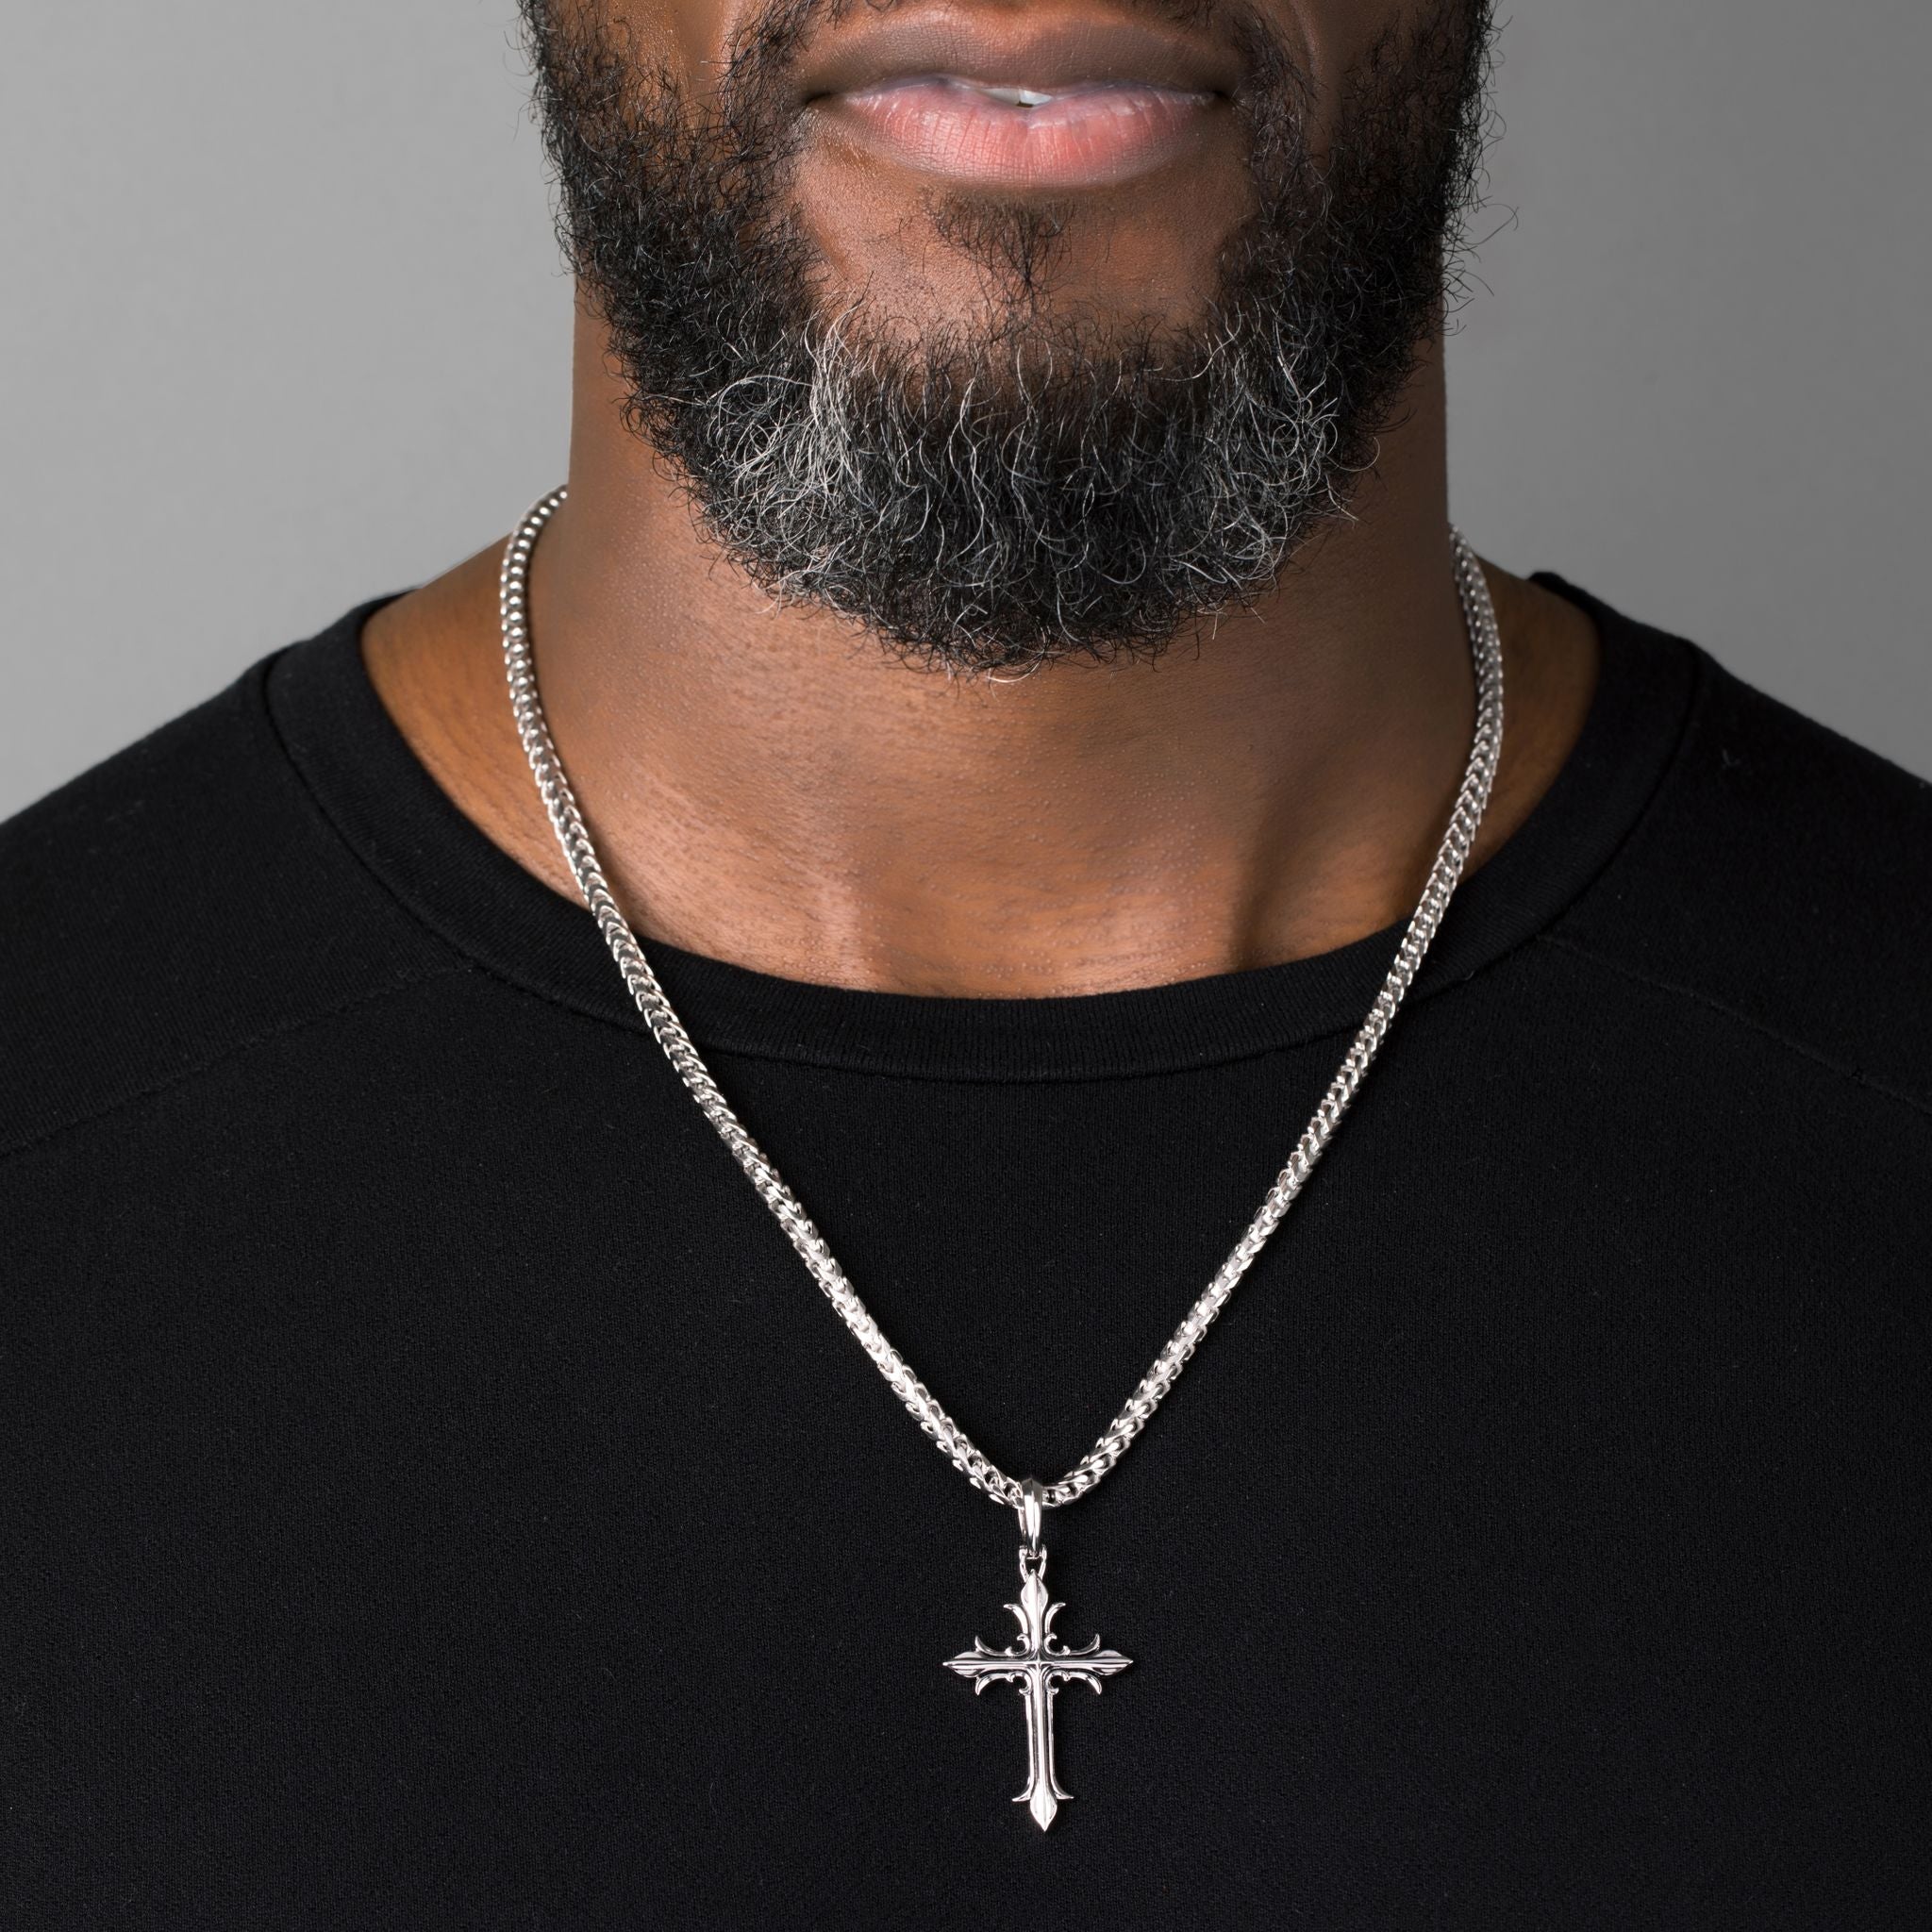 Top 20 Popular Cross Necklaces For Men Today | Men's Fashion Guide | Classy  Men Collection